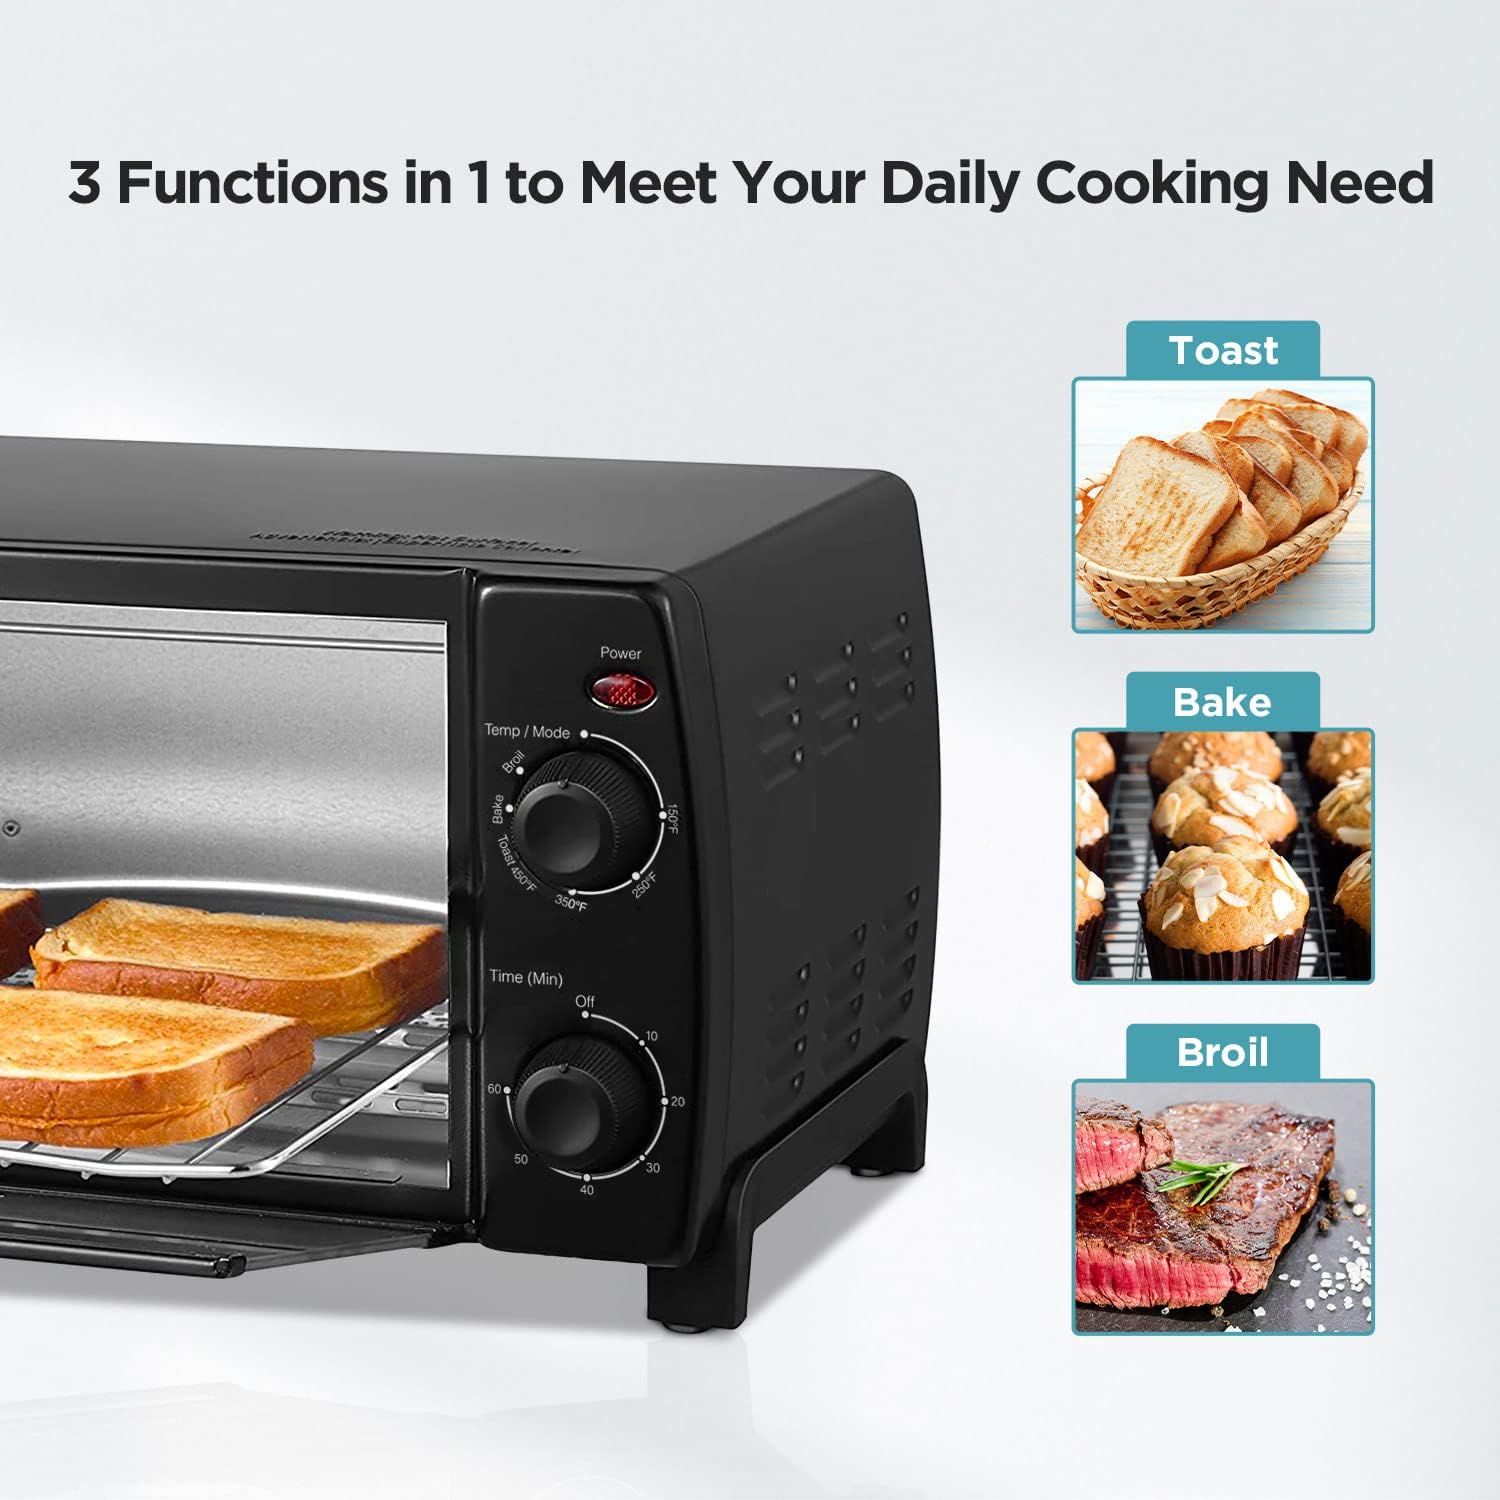 https://bigbigmart.com/wp-content/uploads/2023/06/COMFEE-4-Slice-Small-Toaster-Oven-Countertop-Retro-Compact-Design-Multi-Function-with-30-Minute-Timer-Bake-Broil-Toast-1000-Watts-2-Rack-Capacity-Black-CFO-BB1013.jpg